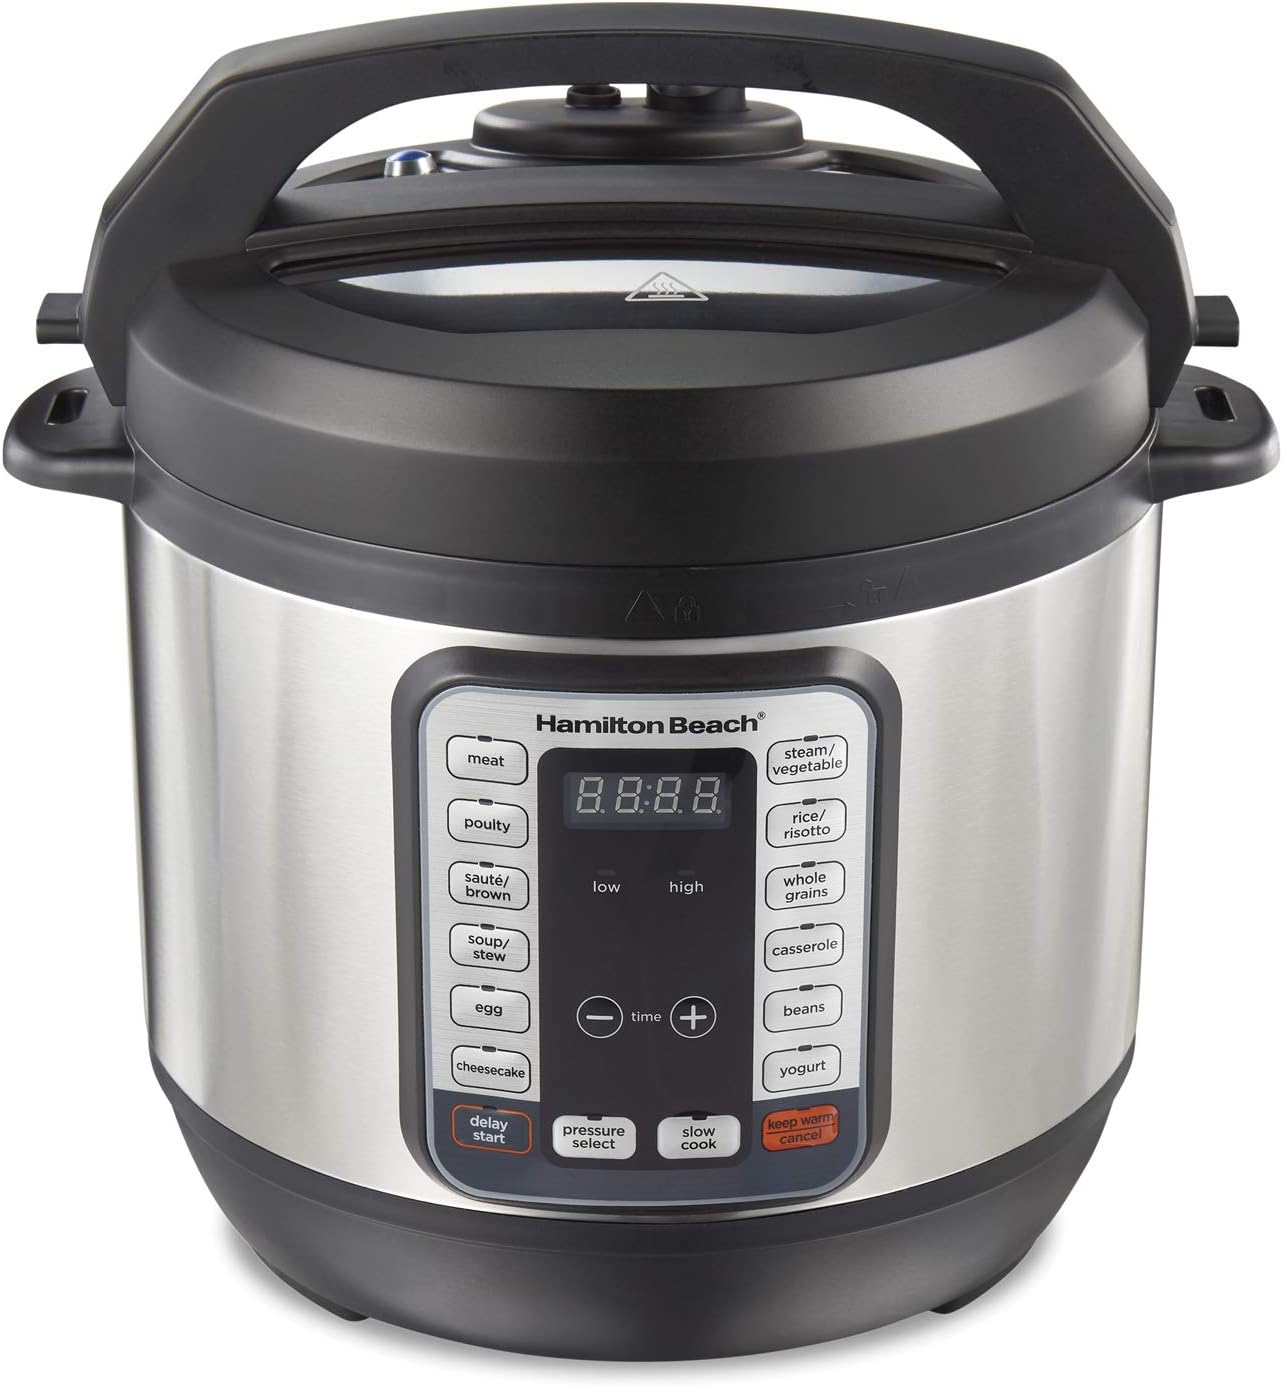 Hamilton Beach 12-in-1 QuikCook Pressure Cooker with True Slow Cook Technology, Rice, Sauté, Egg and More, 8qt., Black and Stainless (34508)